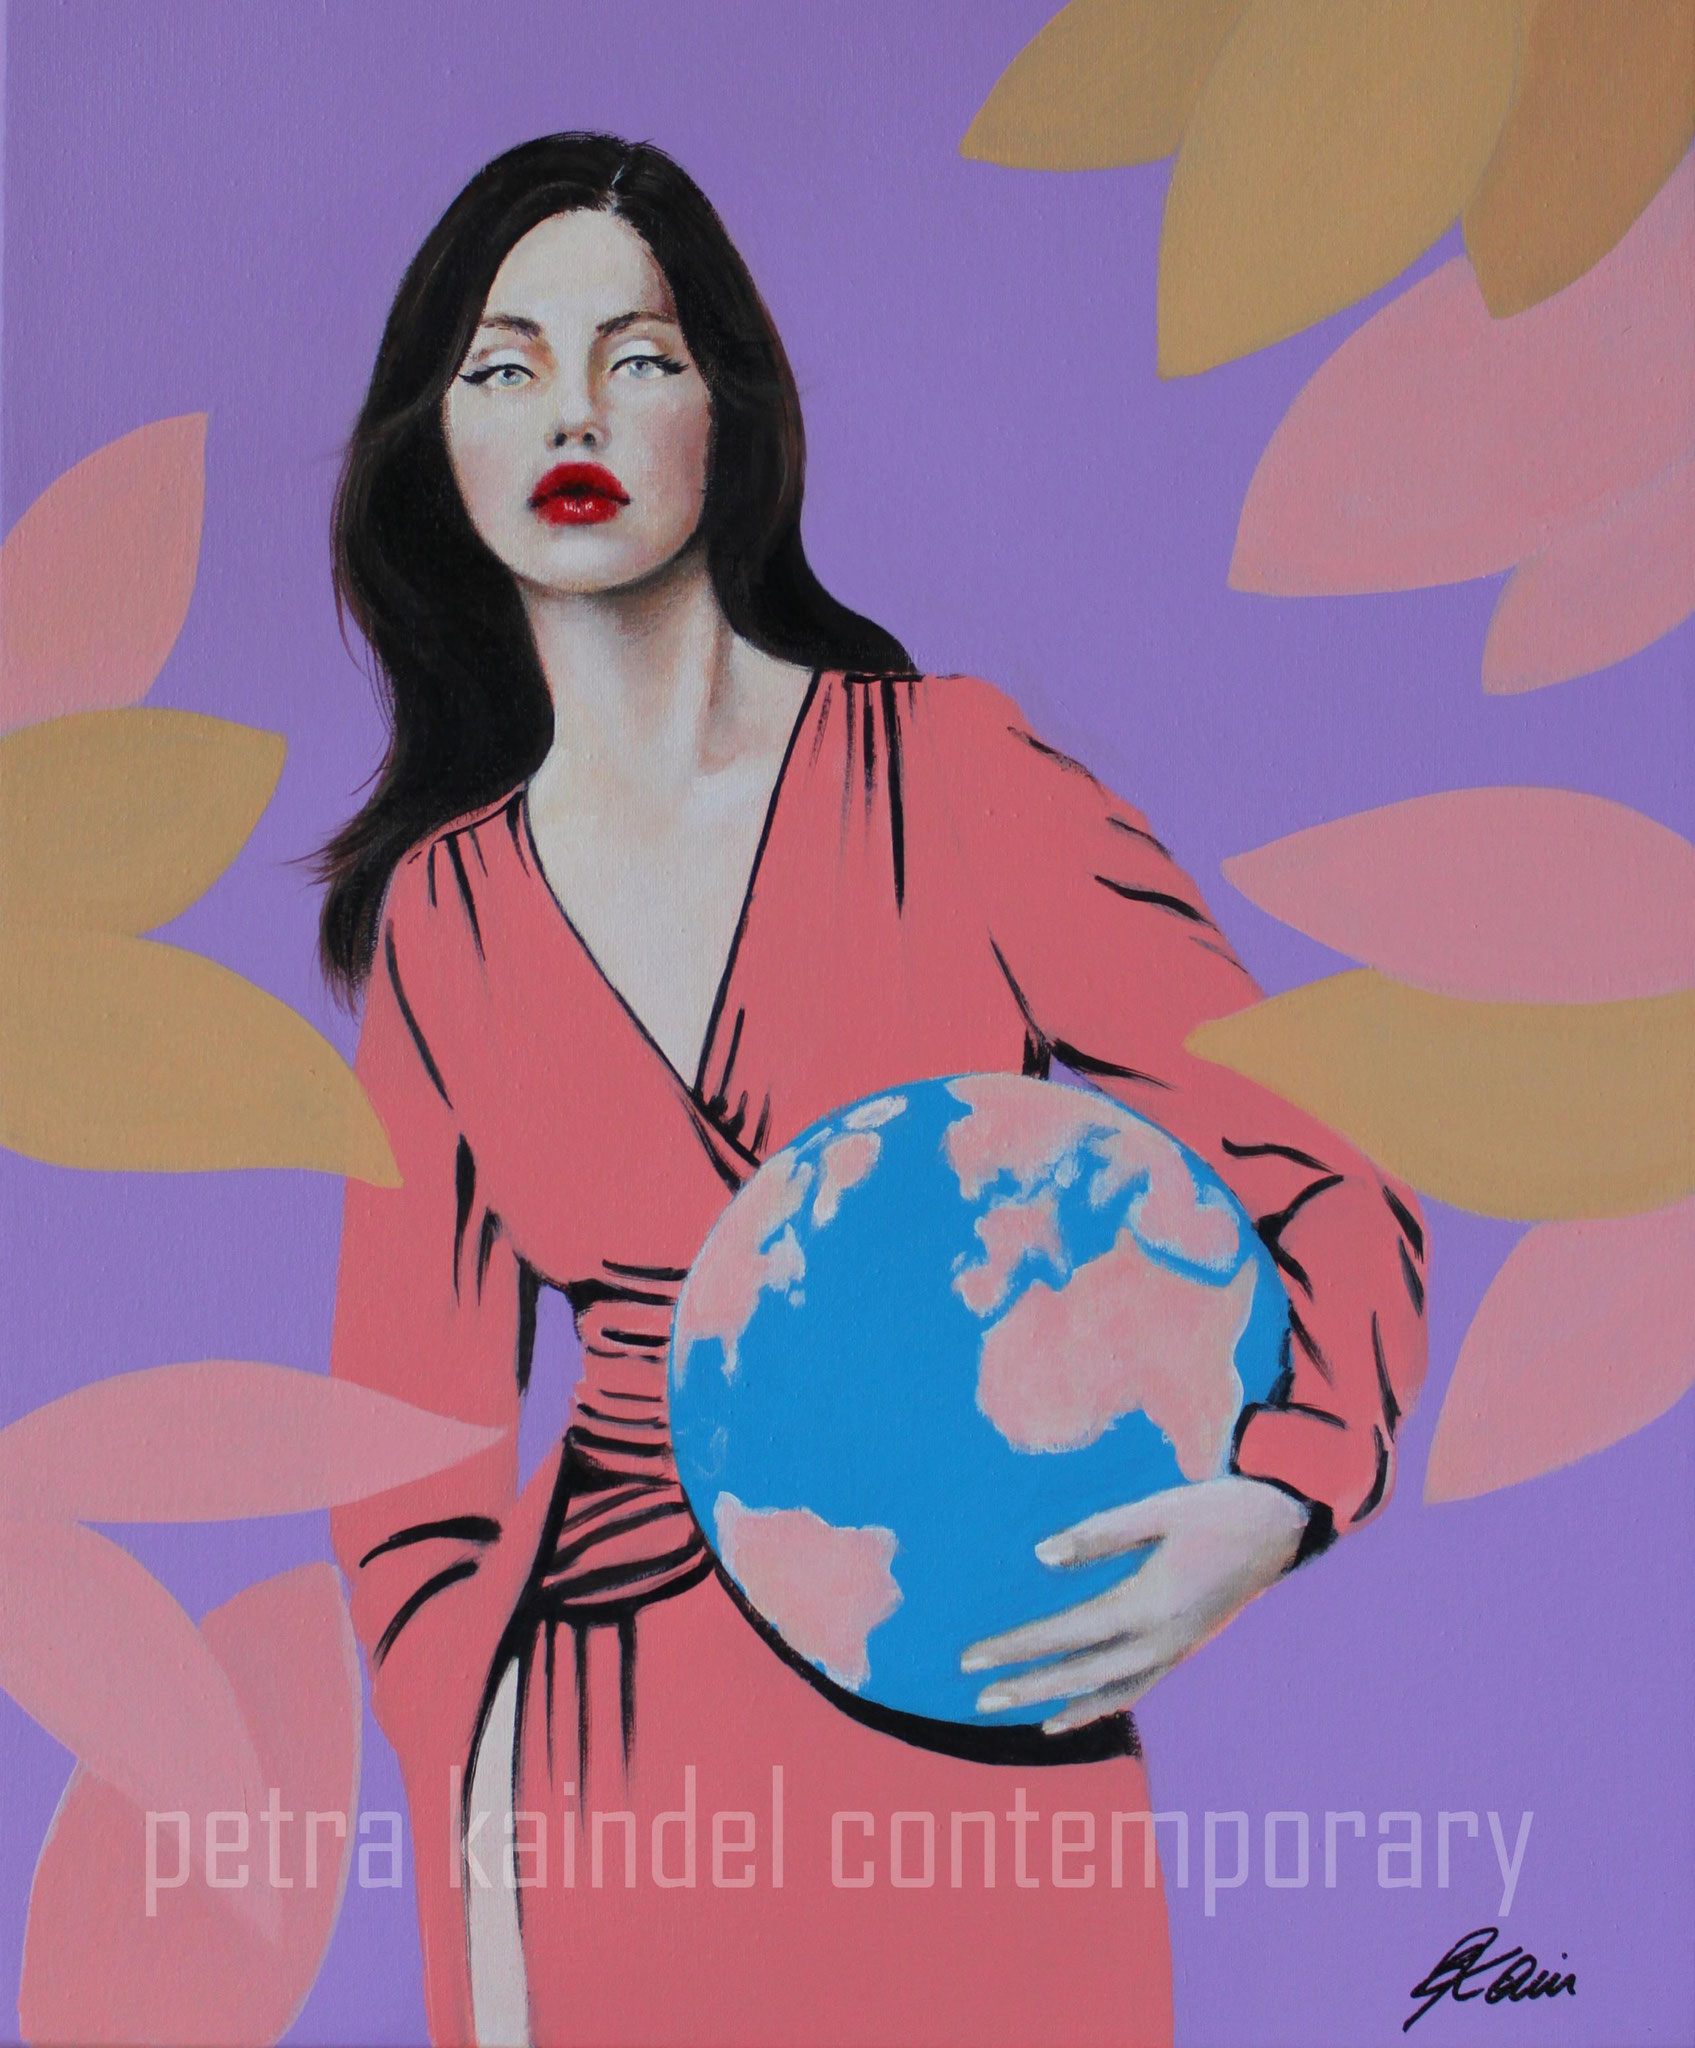 "ATLAS, I'M TAKING OVER NOW!" 606 x 500 mm, Acrylic on canvas, reserved for exhibition Japan